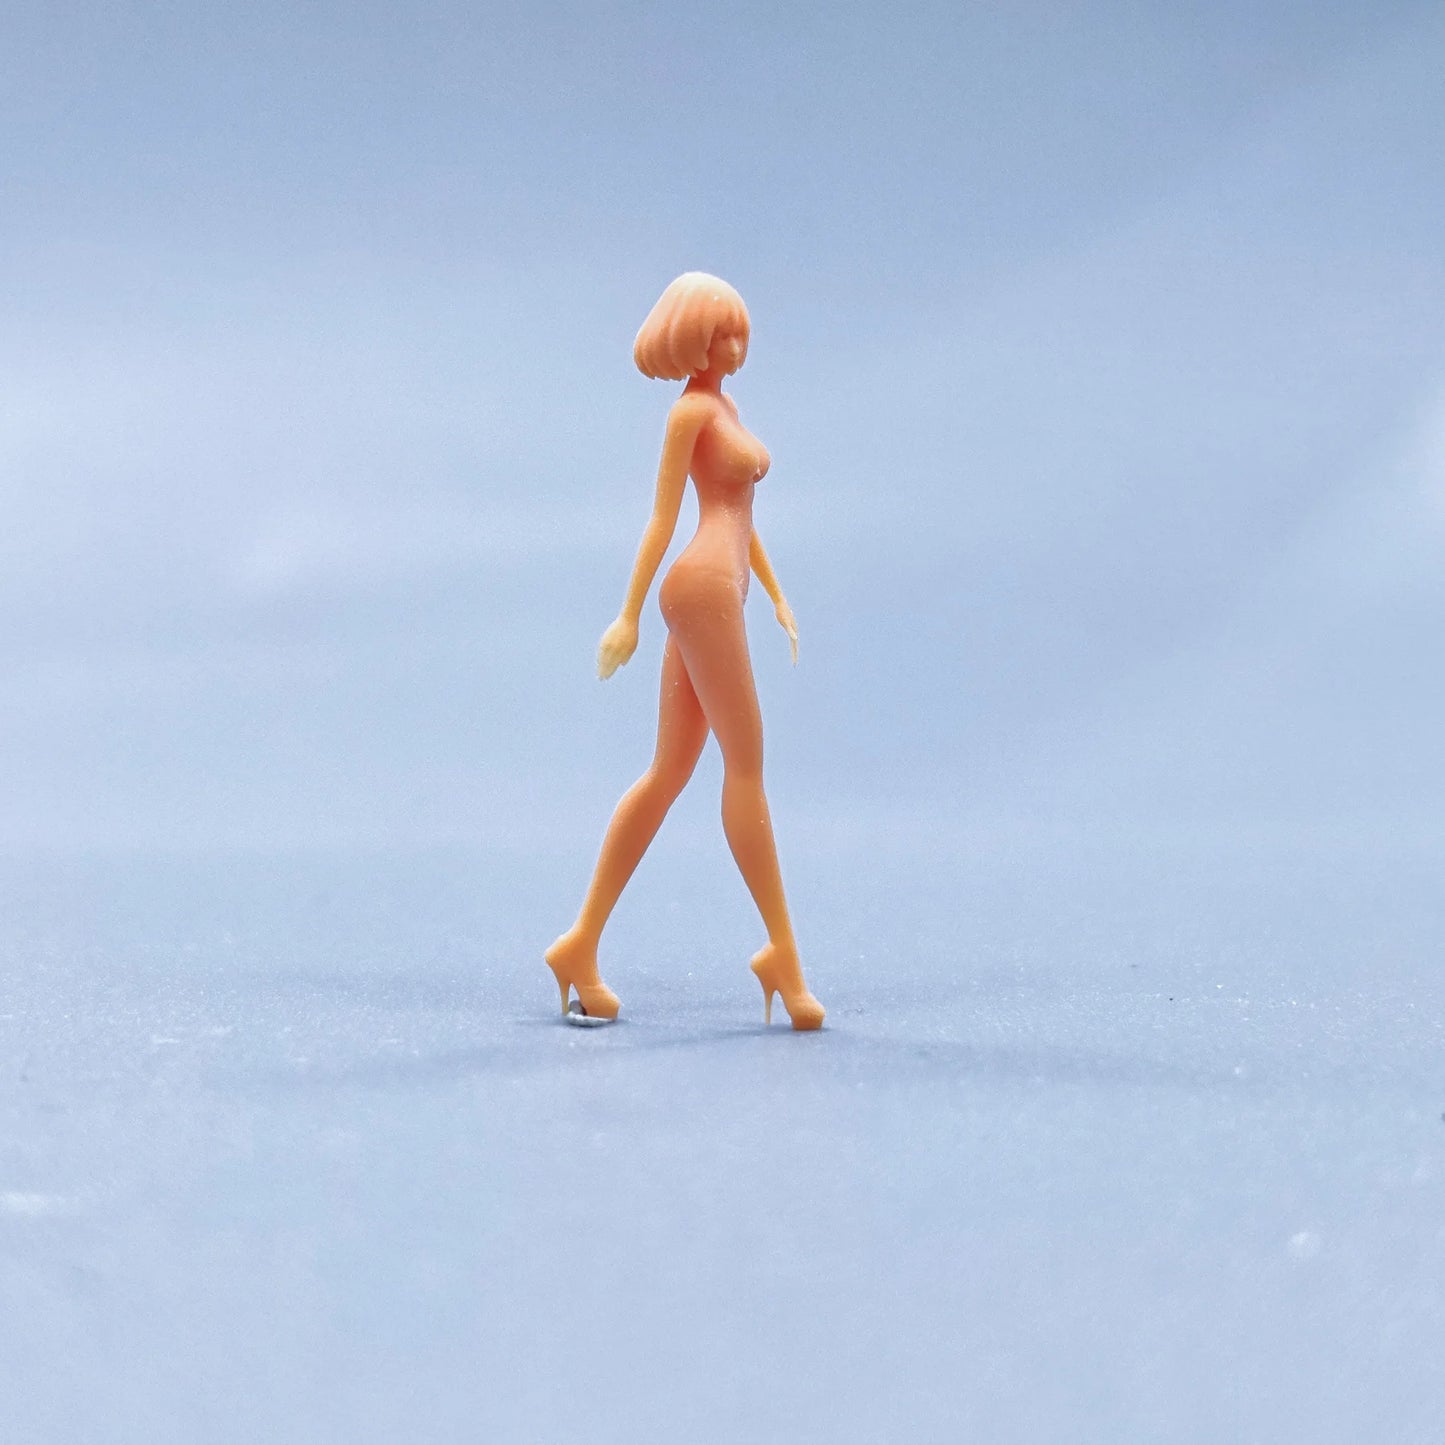 1/64 1/43 Figurines Scale Model Resin Sitting Bikini Short Hair Girl Uncolored Miniatures Diorama Hand-painted S745